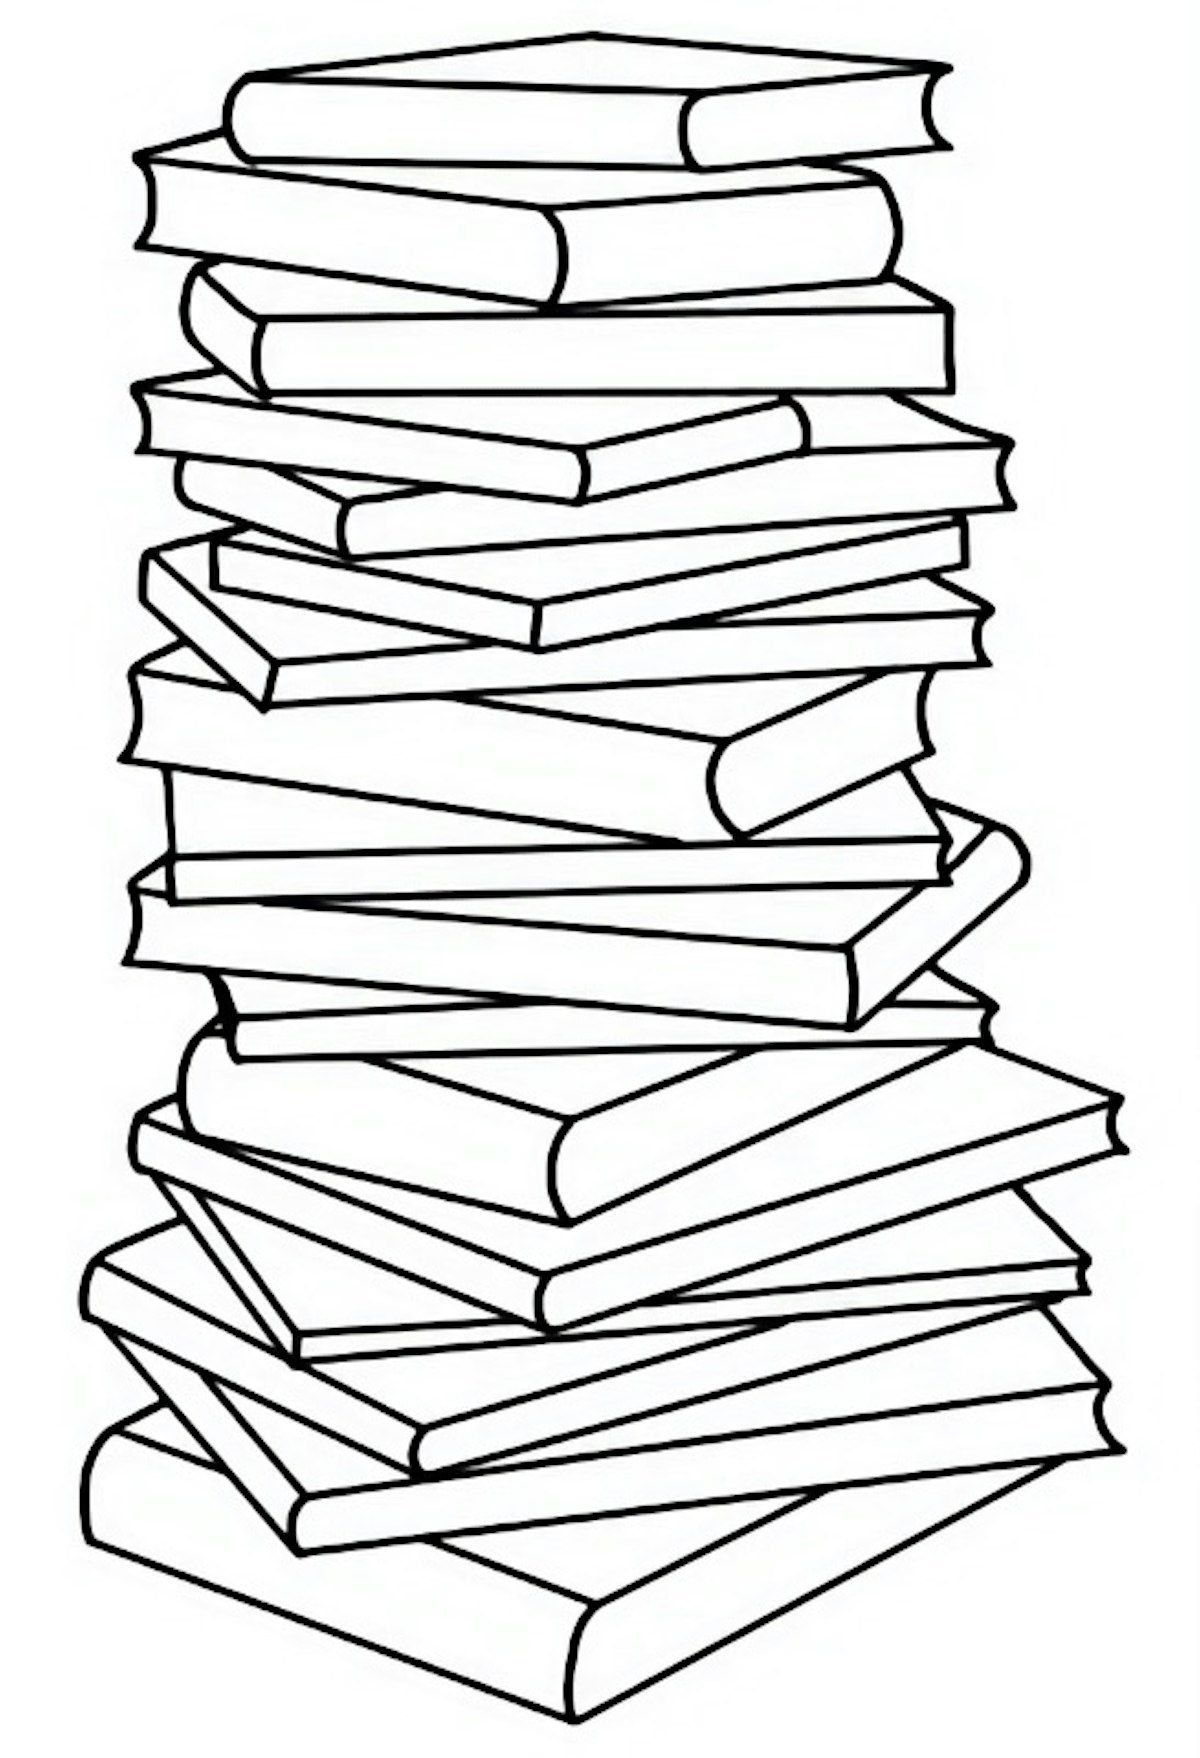 featured image - A Web Stack is Like a Pile of Books